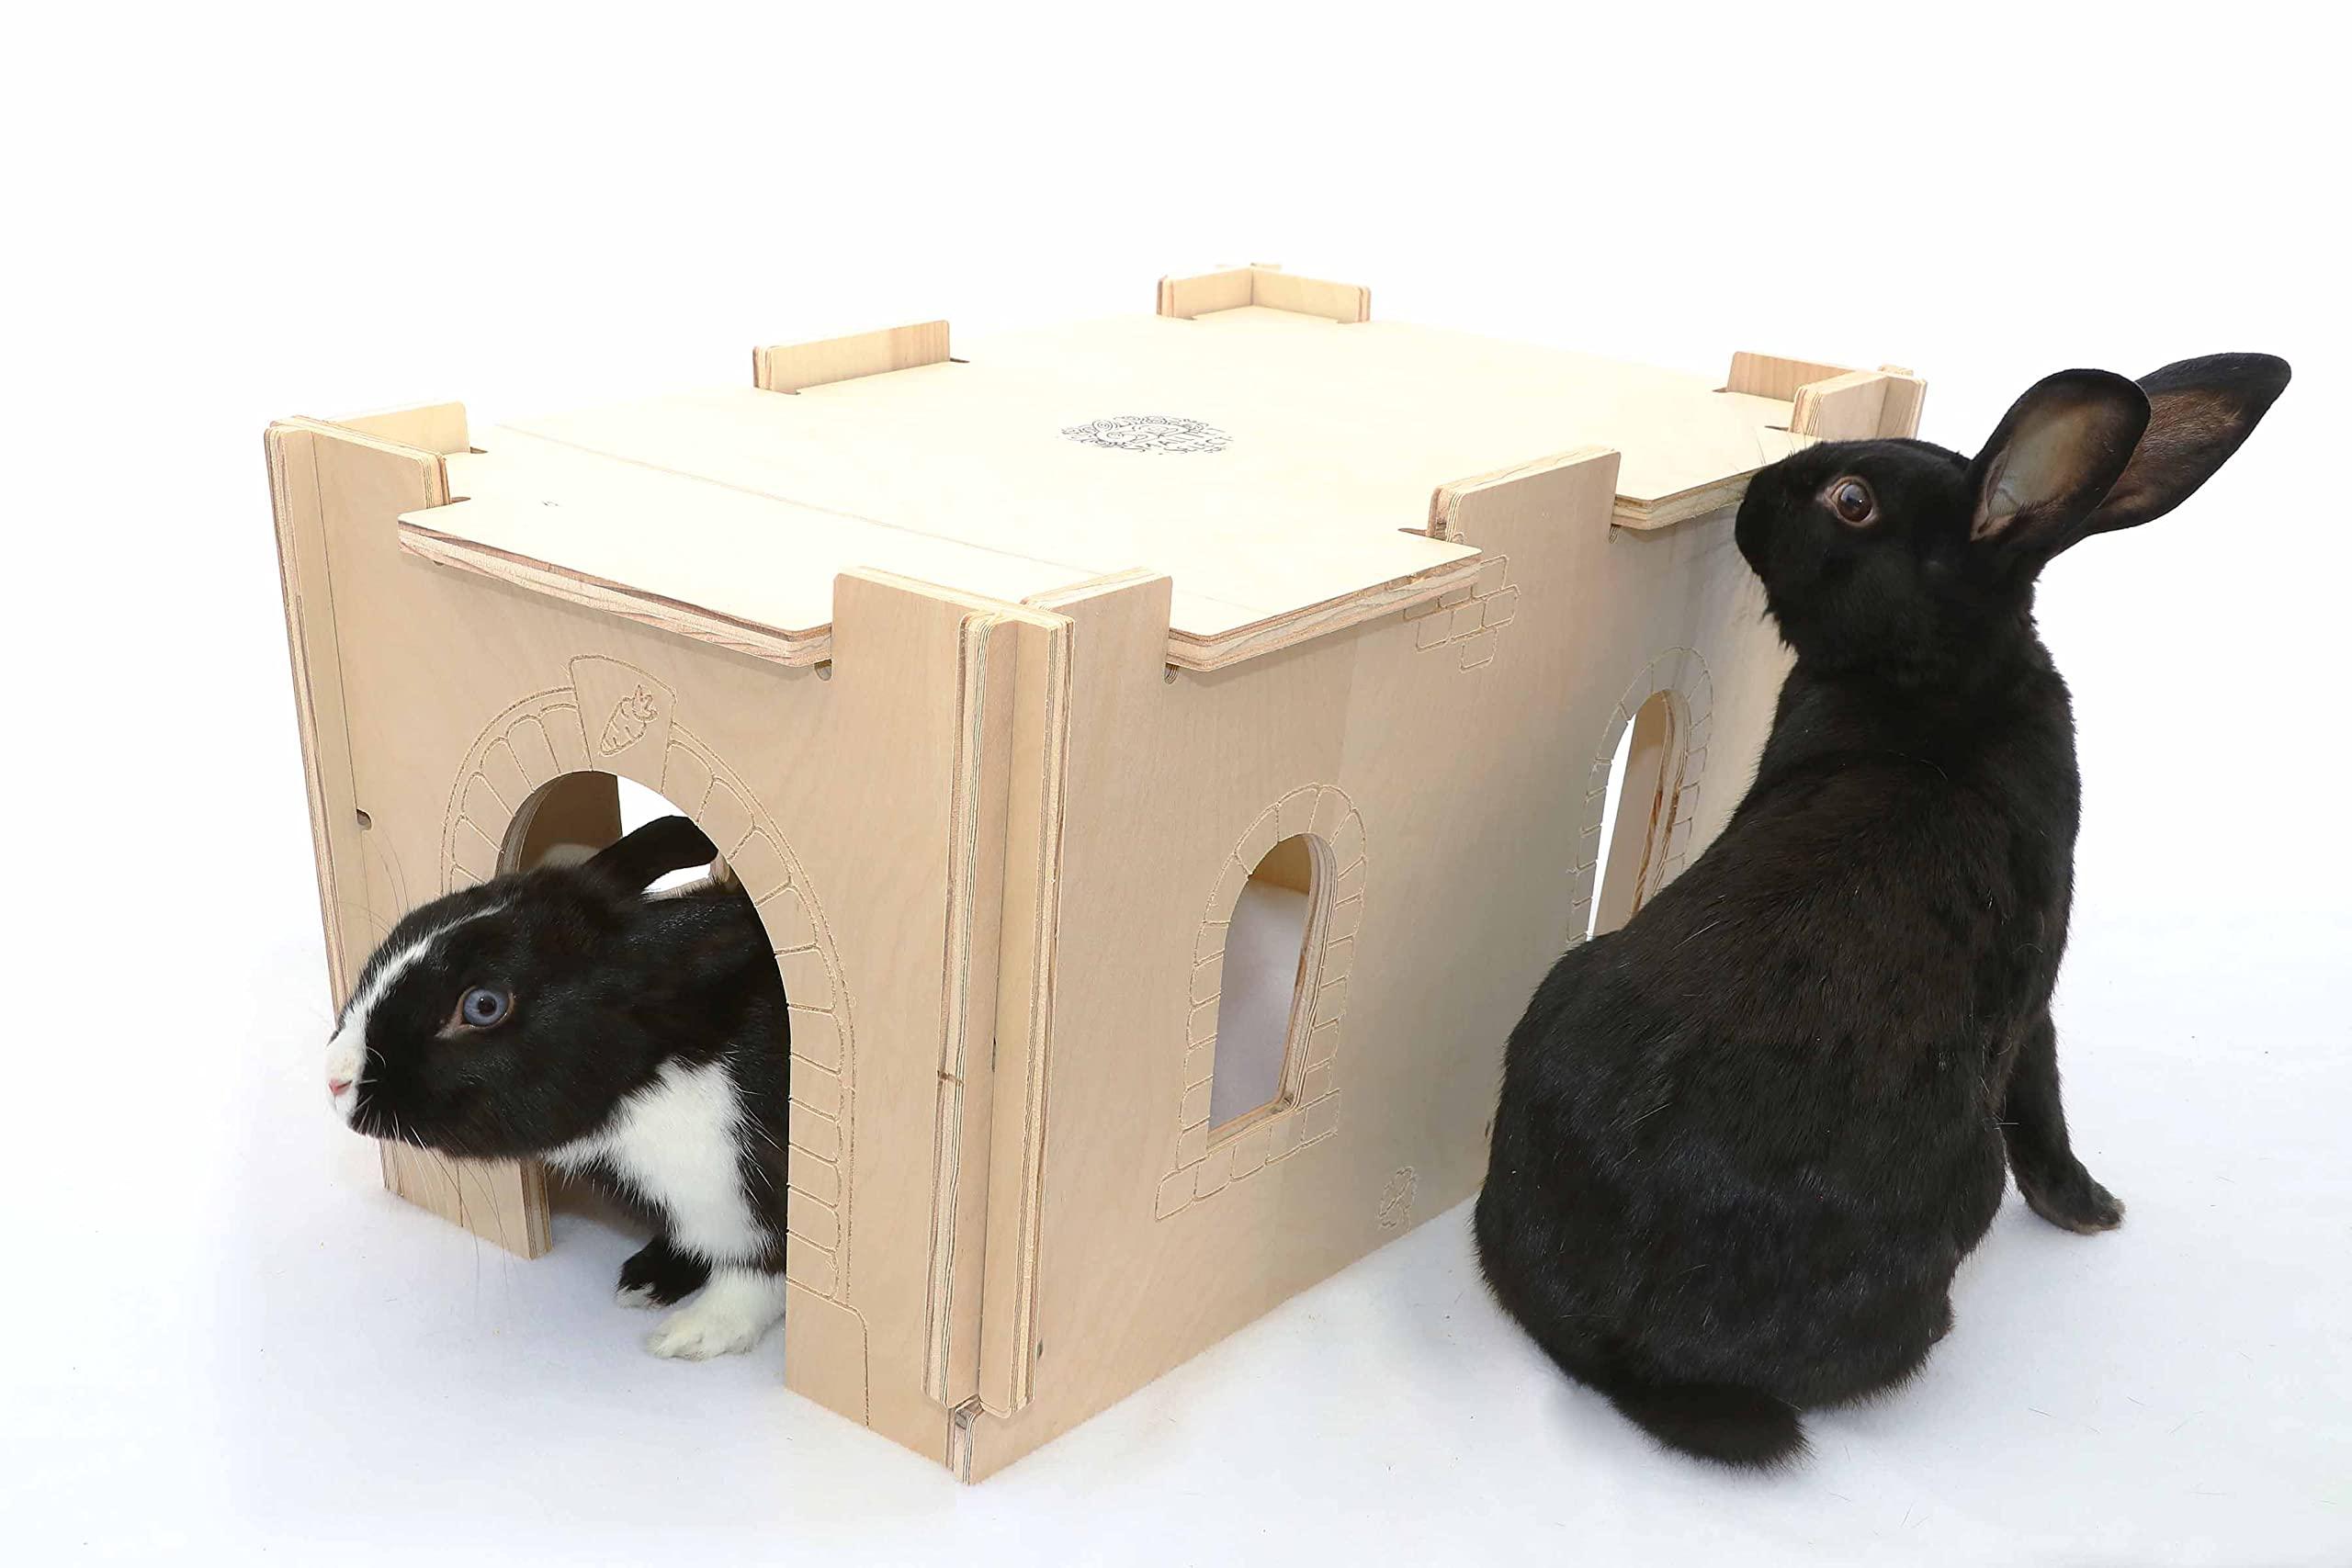 Small Pet Habitat Hideout-Tunnel, Rabbits, Guinea Pigs, Other Small Animals